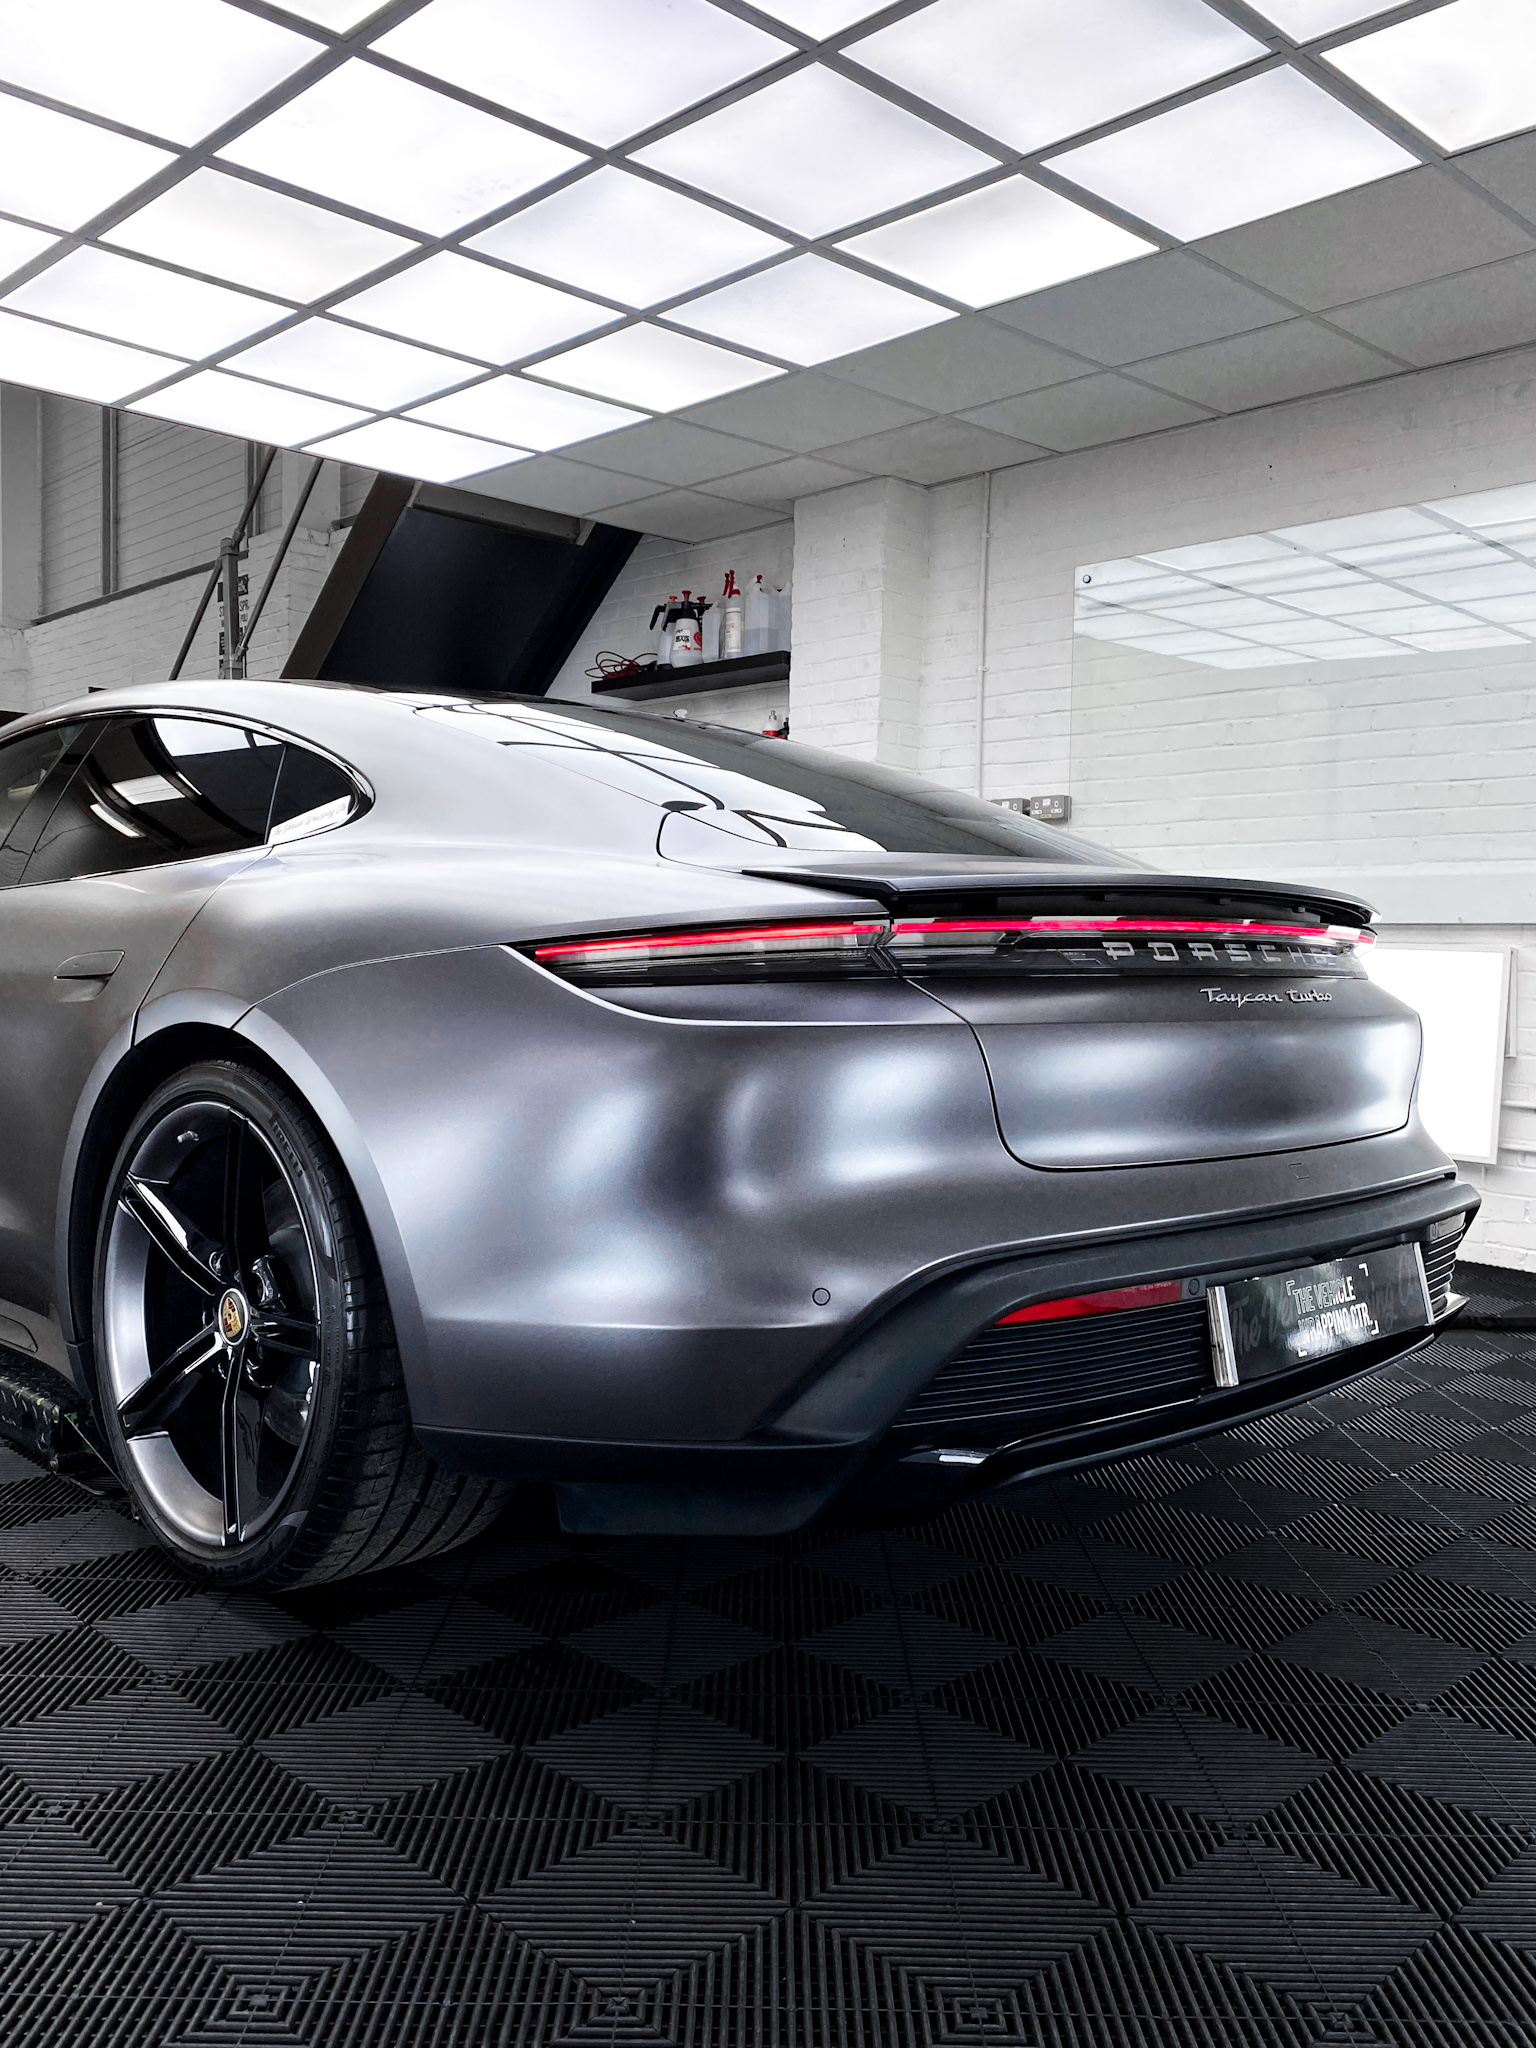 Porsche Taycan - Satin Dark Grey - Personal Wrapping Project